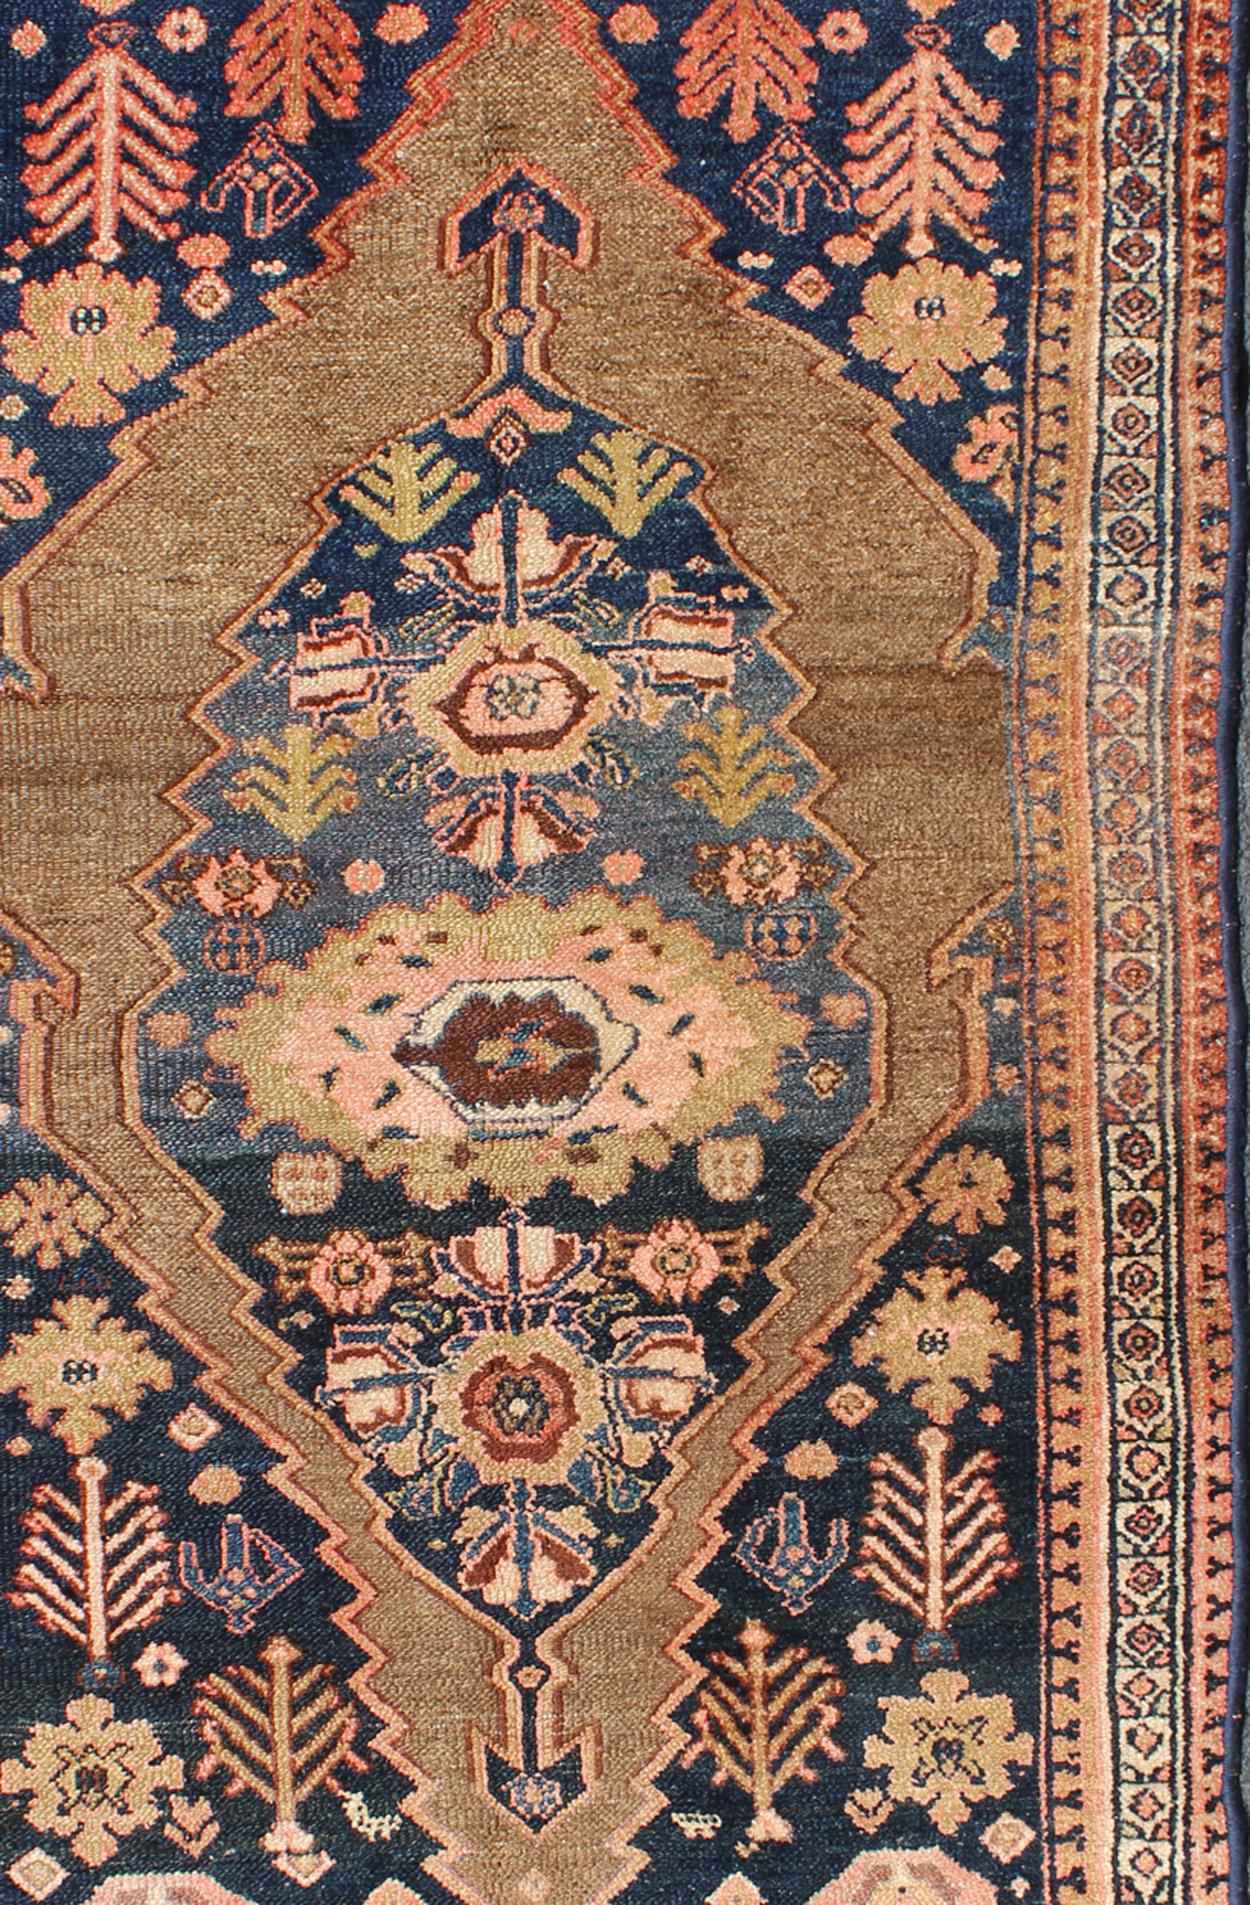 Tribal Medallion Design Antique Persian Serab Rug in Camel and Shades of Blue In Good Condition For Sale In Atlanta, GA